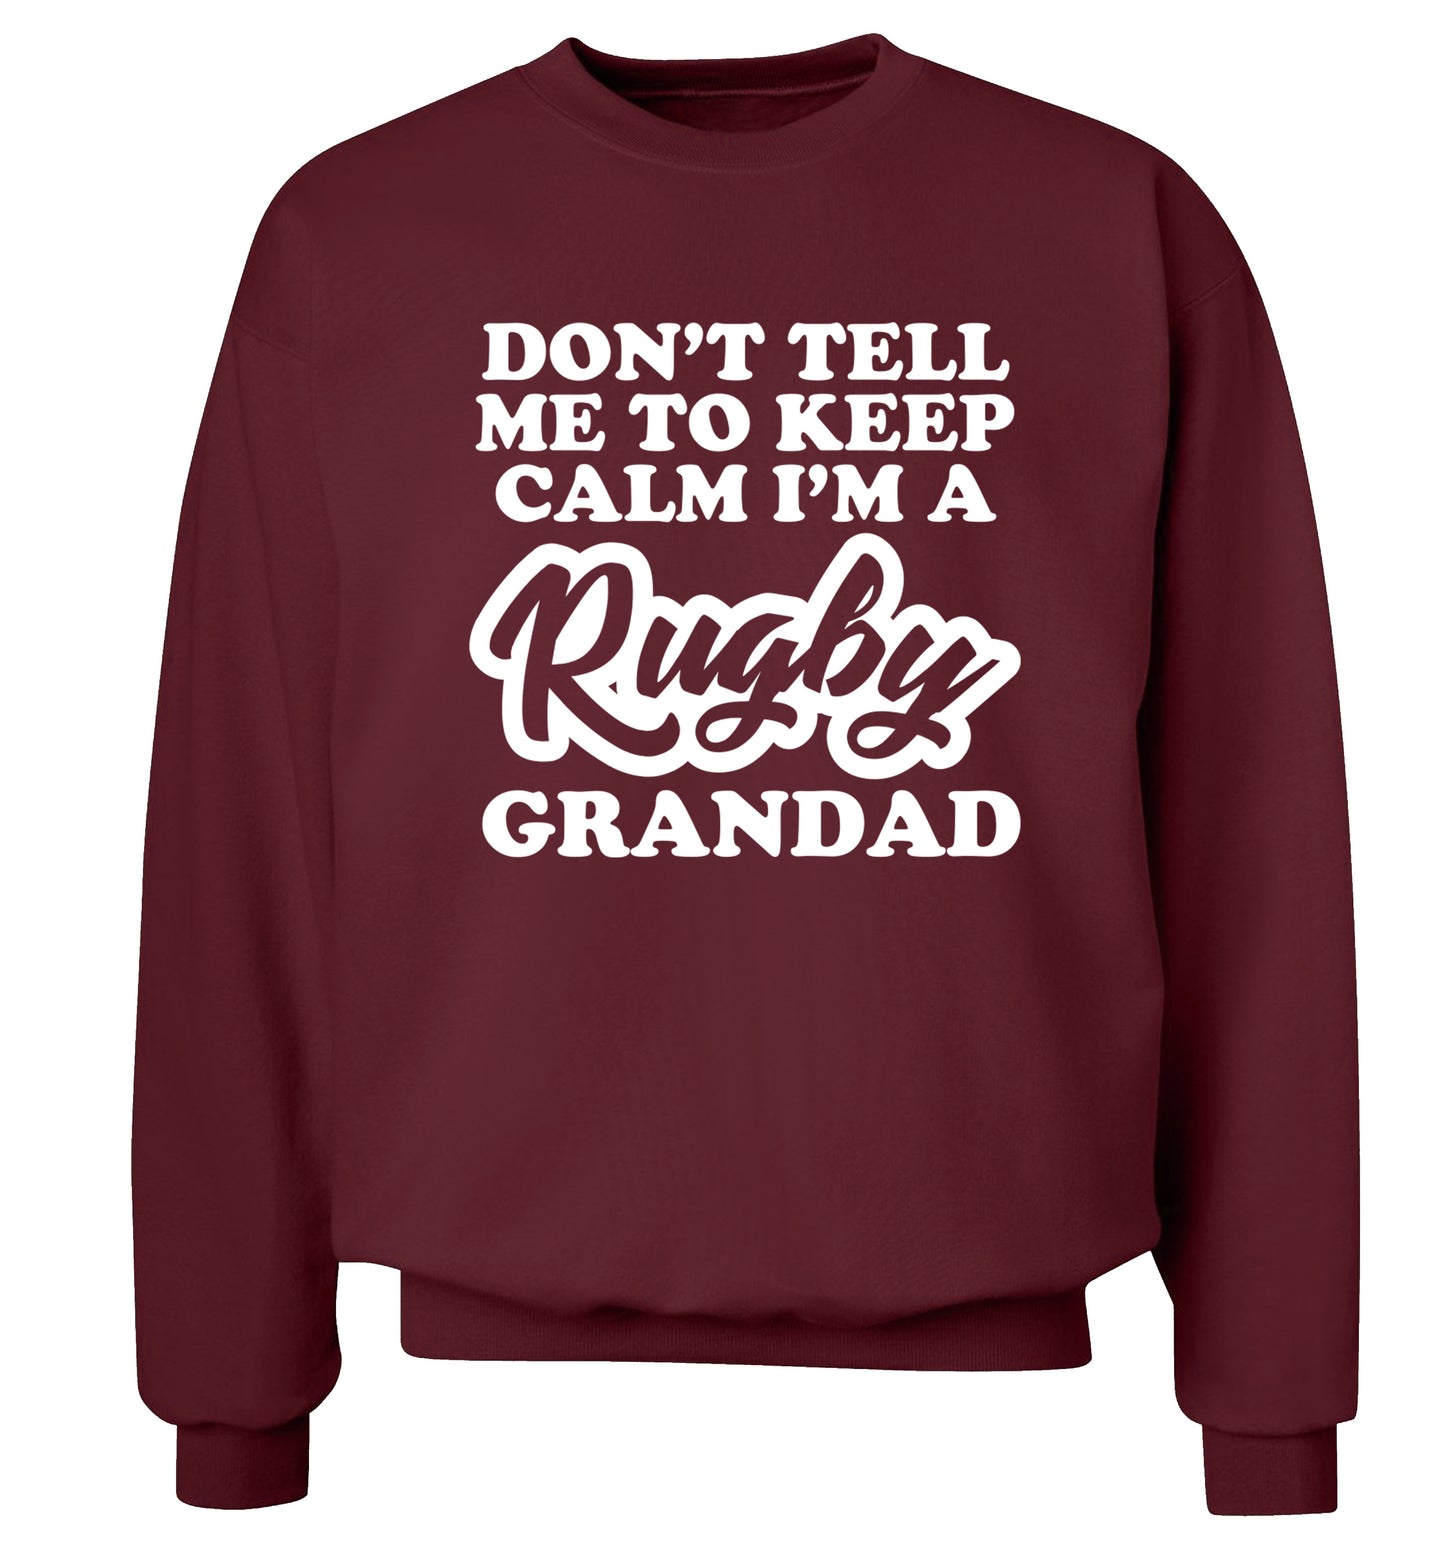 Don't tell me to keep calm I'm a rugby dad Adult's unisex maroon Sweater 2XL